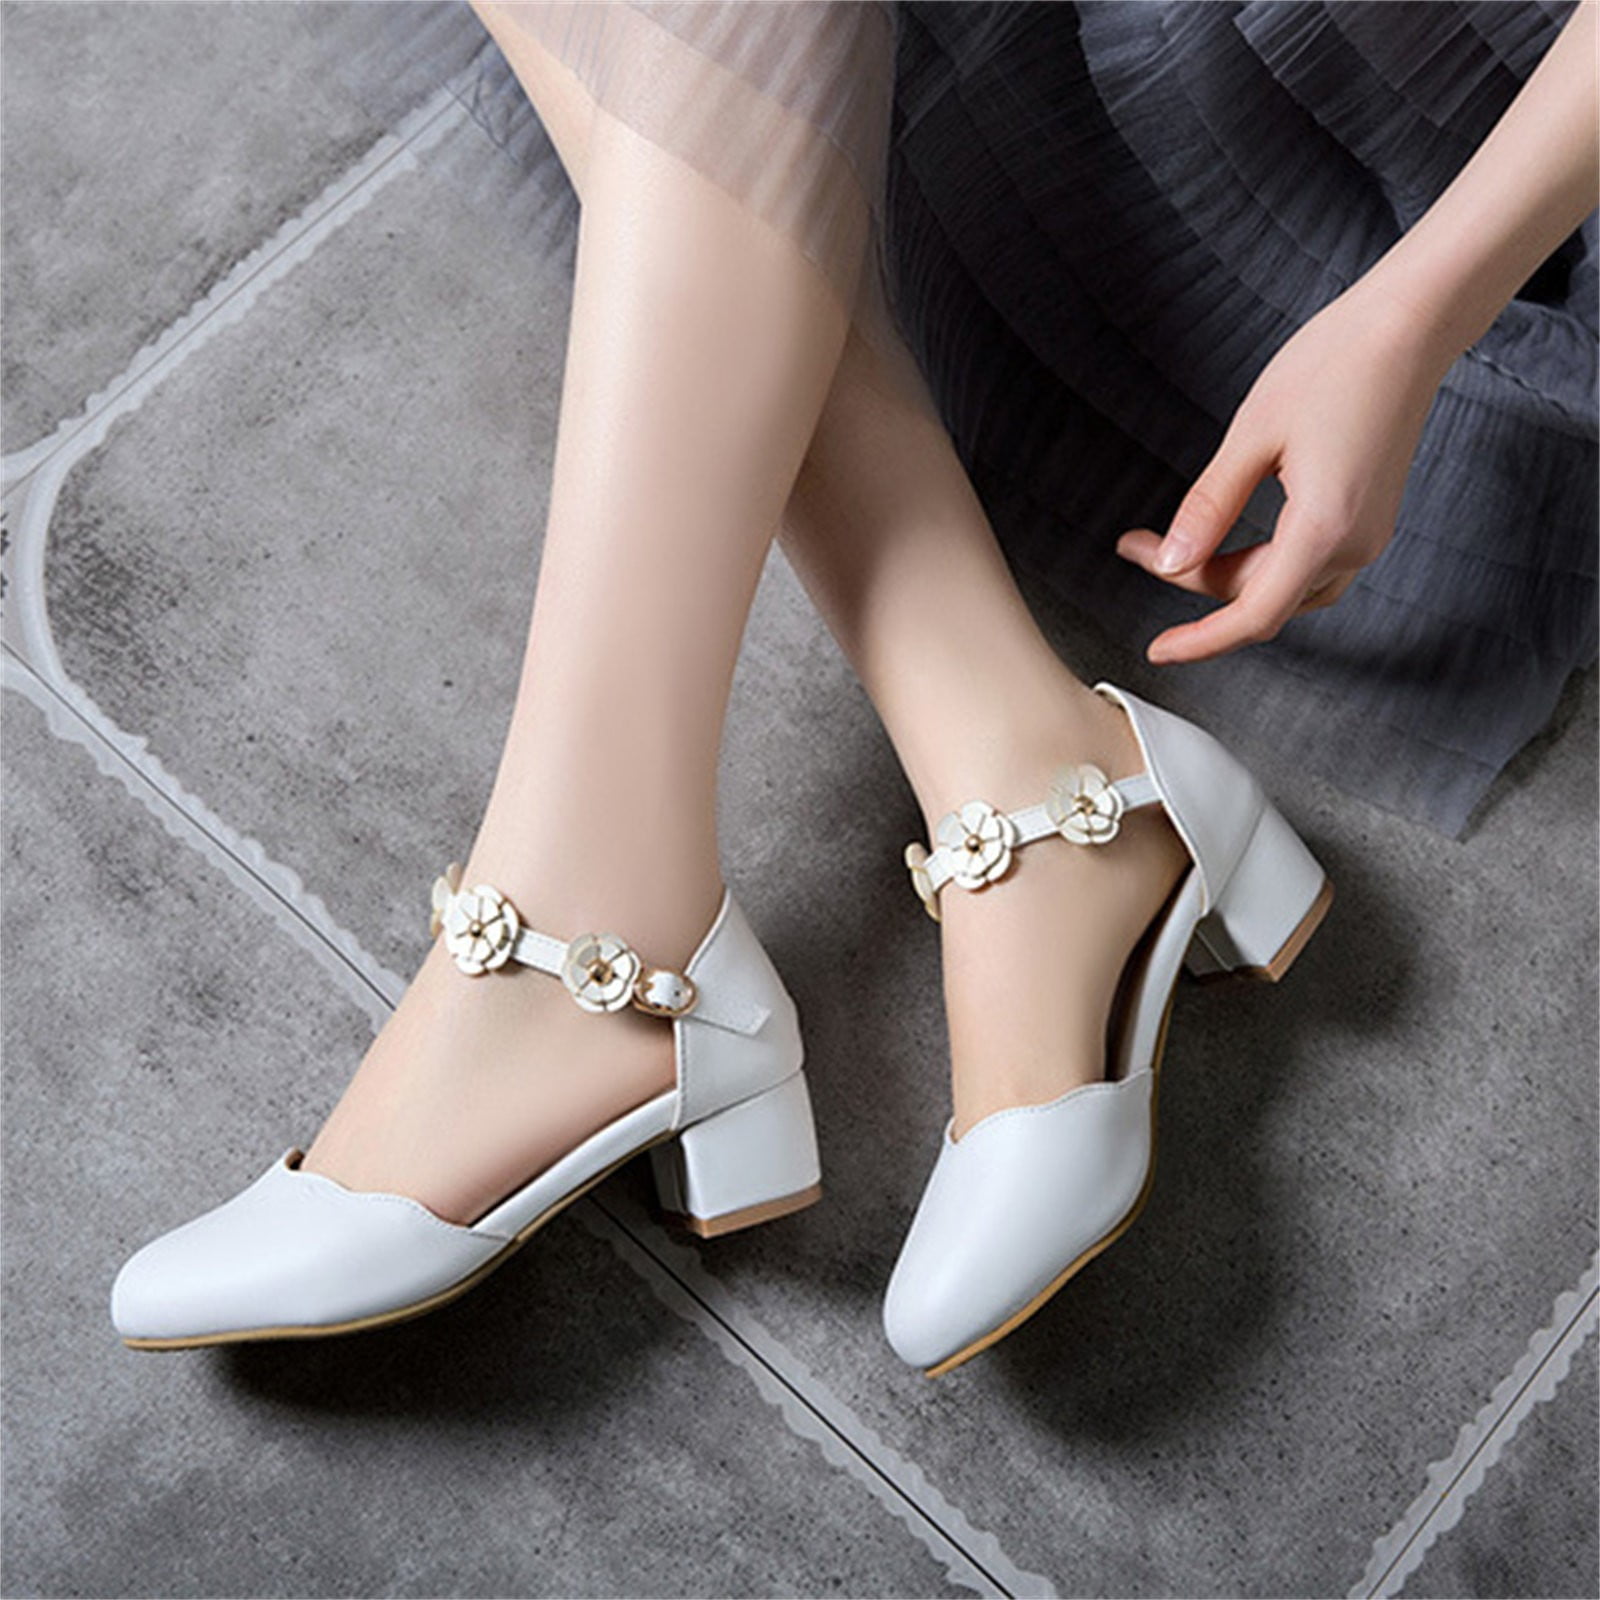 New Fashion Metal Heel Super High Heel Shiny Lacquer Leather Shallow Mouth  Pointed Head Sexy Nightclub Slim High Heel Single Shoe Size 34 43 From  Bags254, $21.79 | DHgate.Com